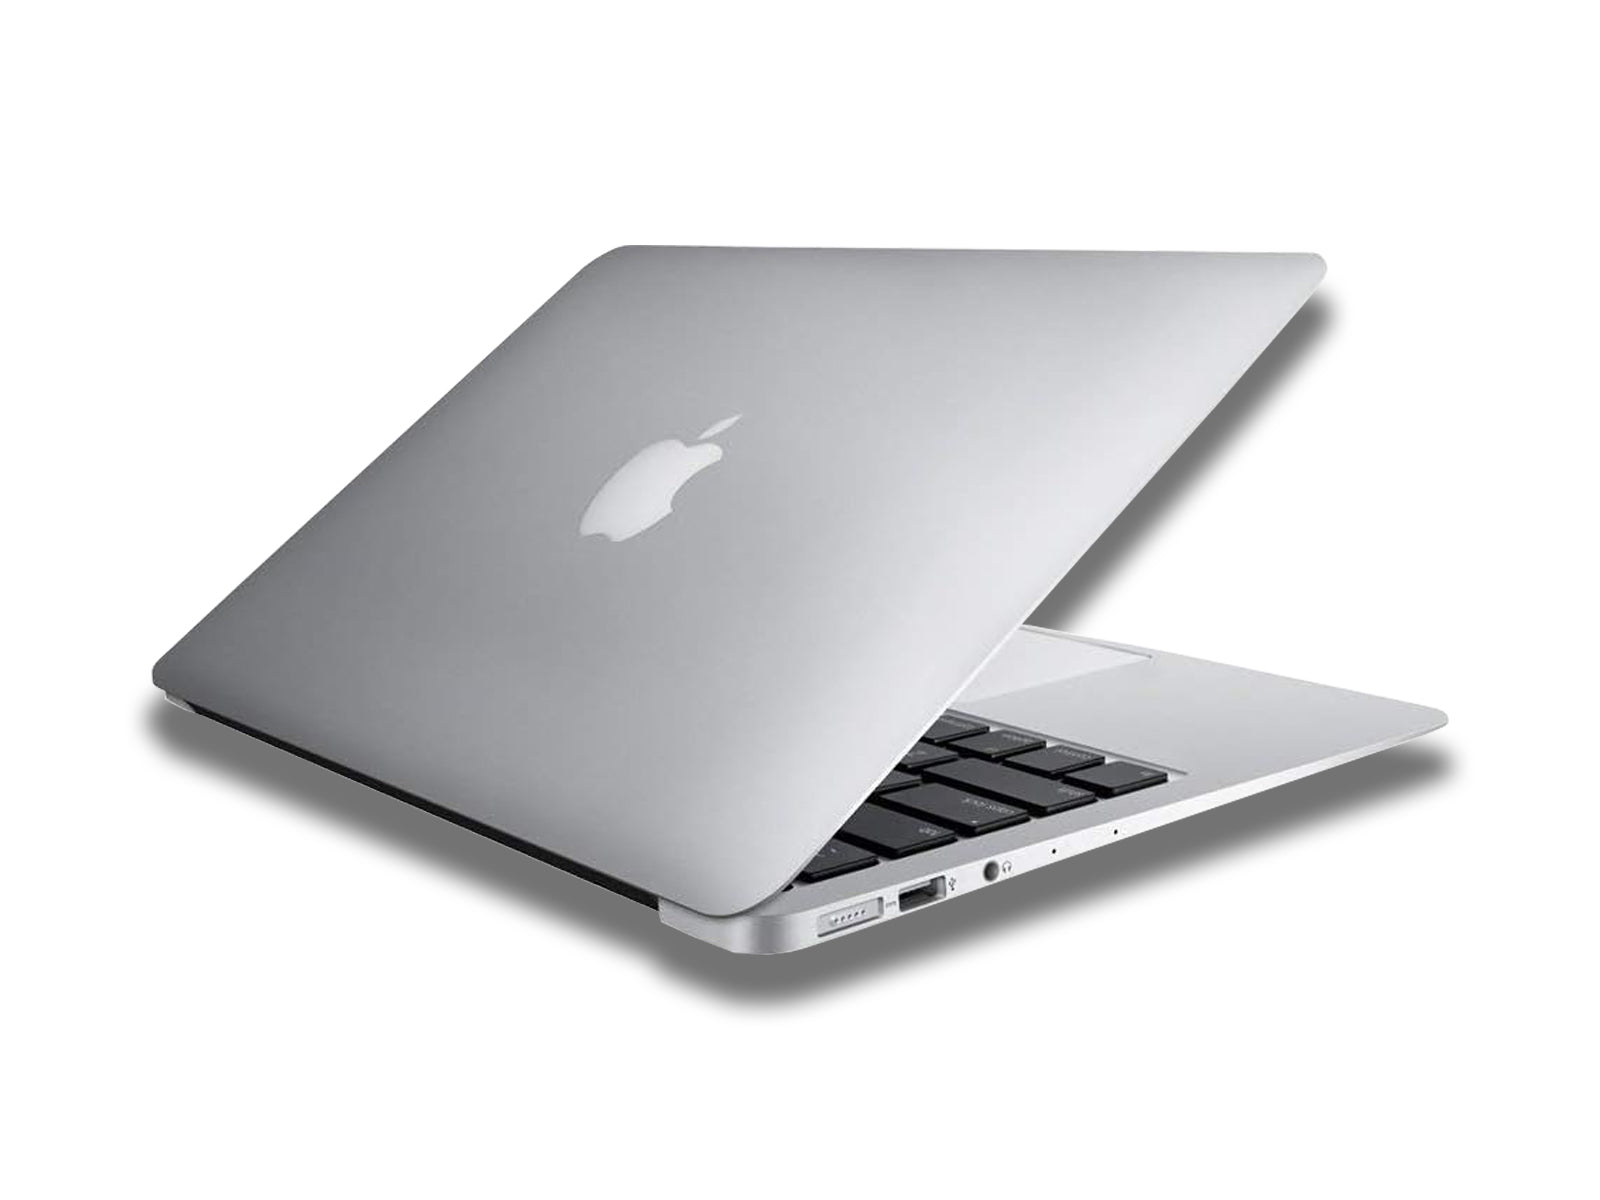 Image shows an angled right view of the Apple MacBook Air